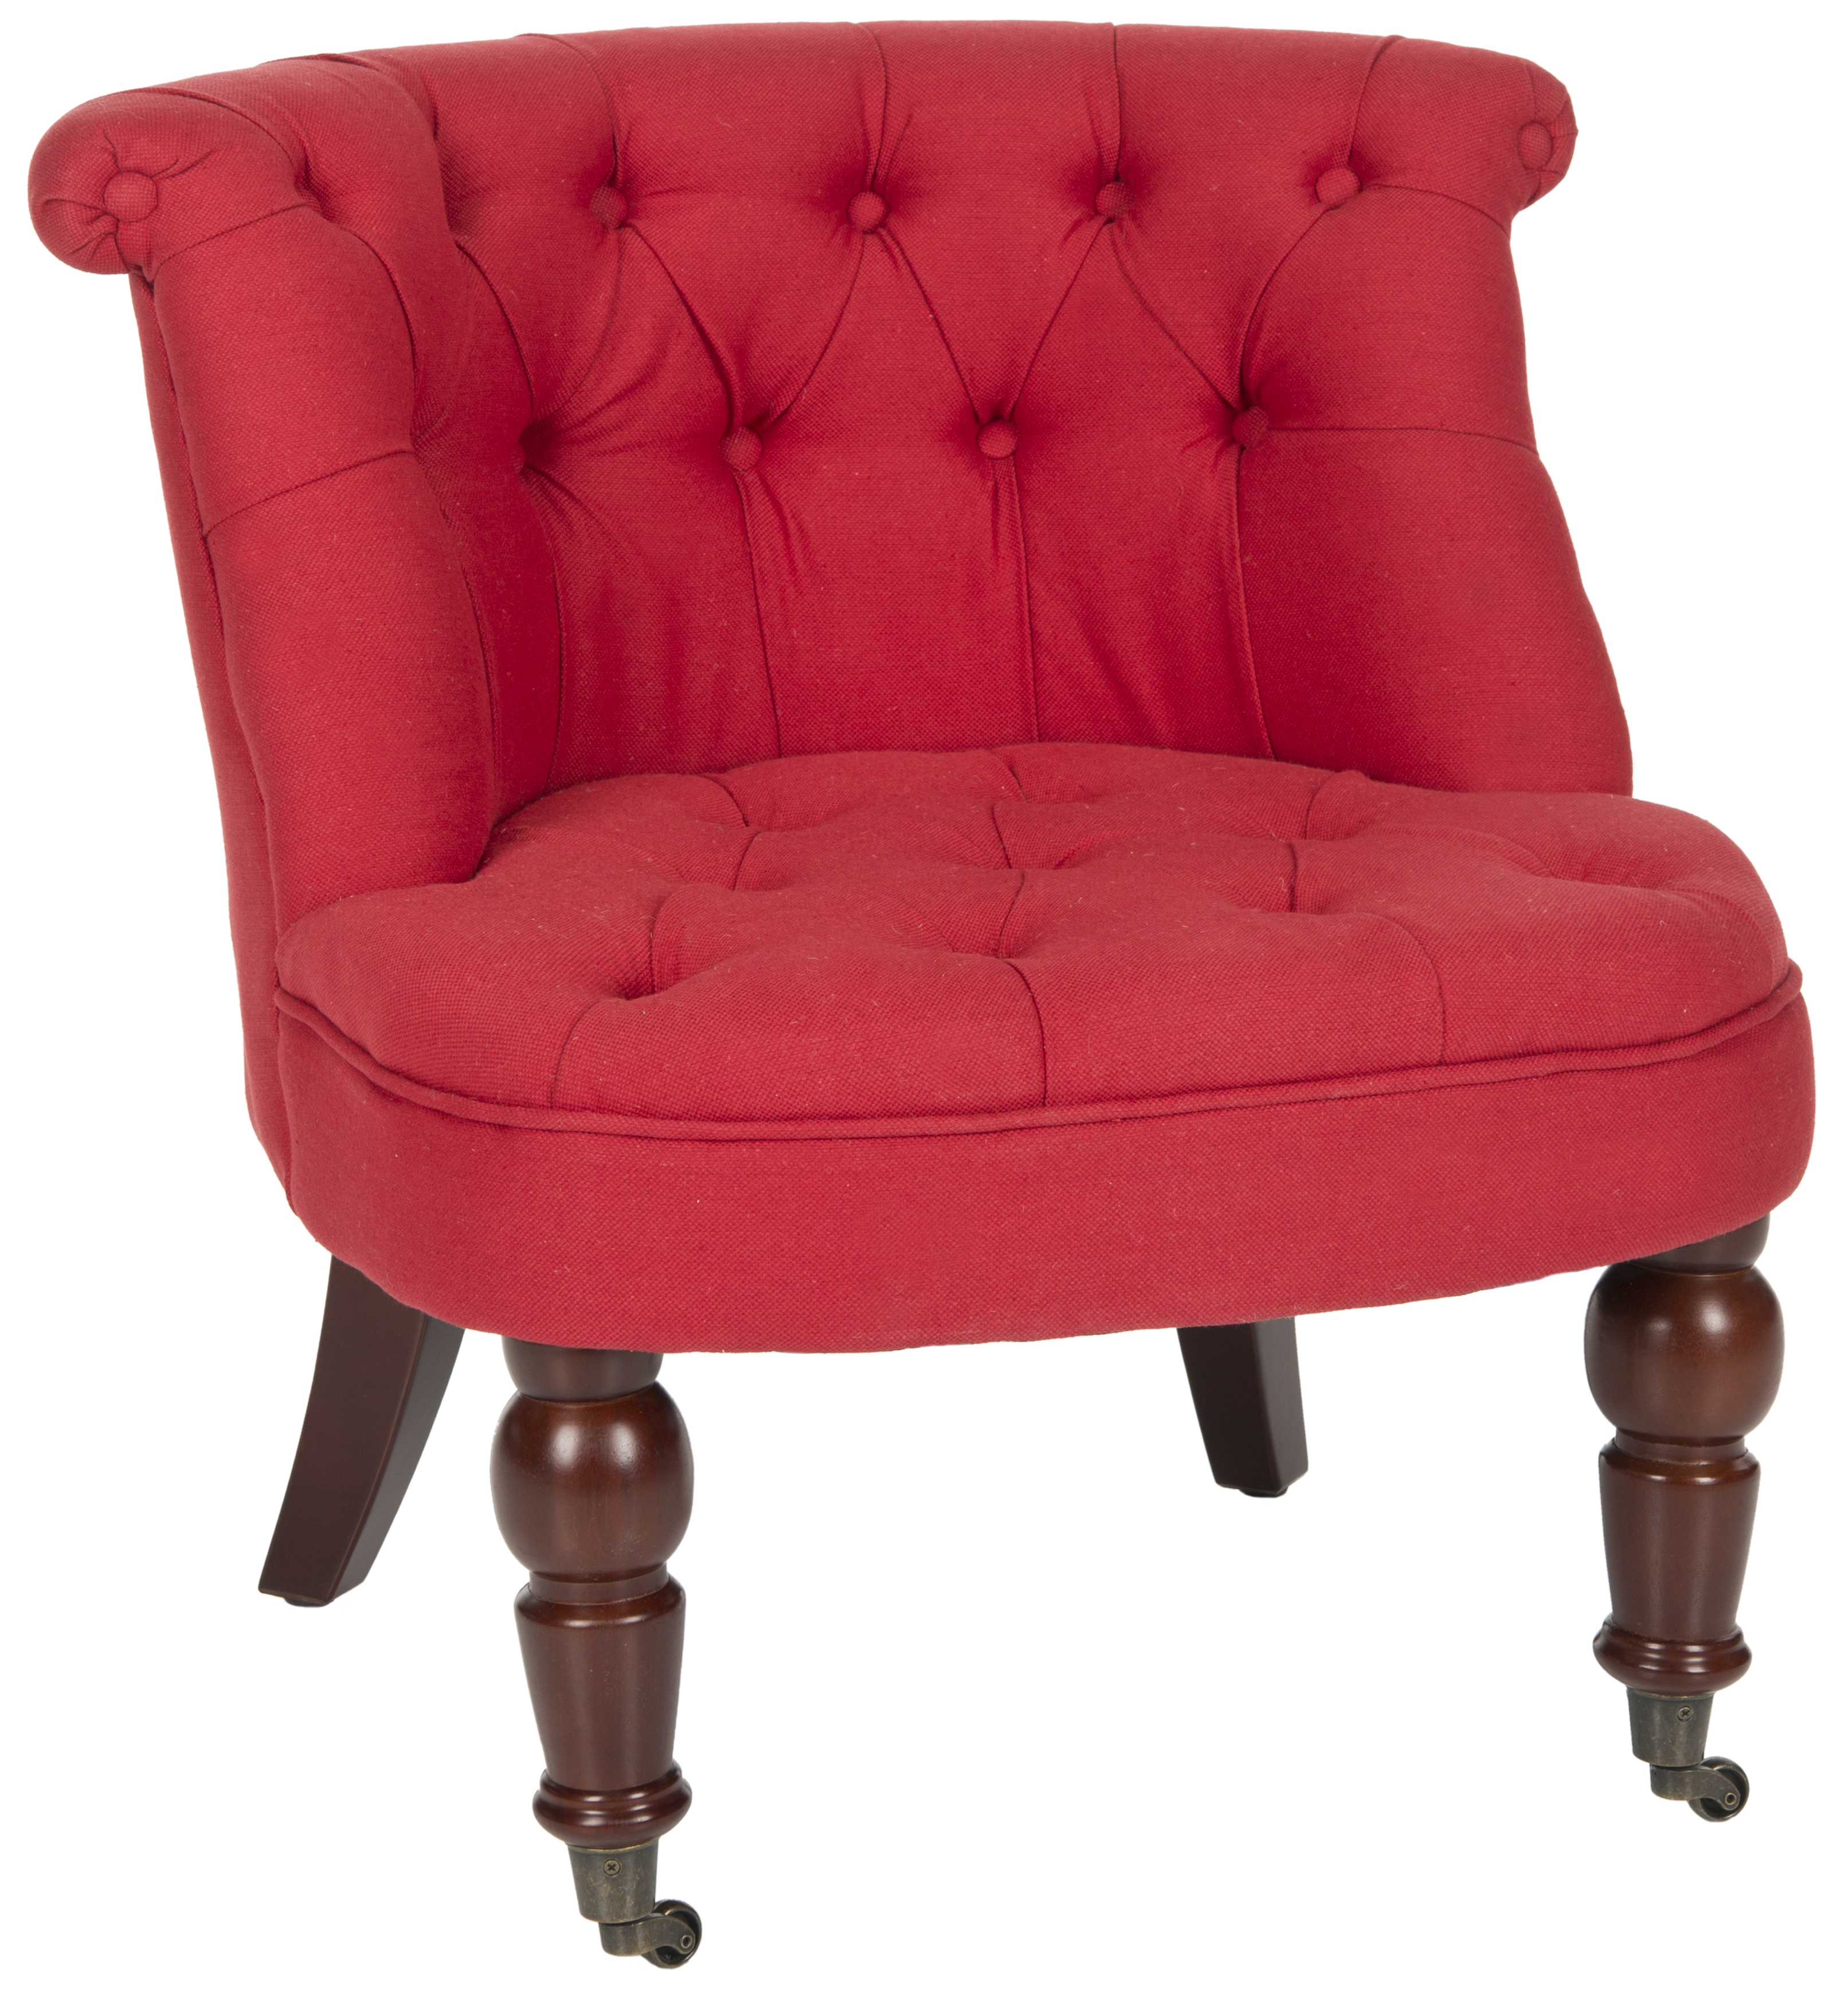 Carlin Tufted Chair - Cranberry/Cherry Mahogany - Arlo Home - Image 1